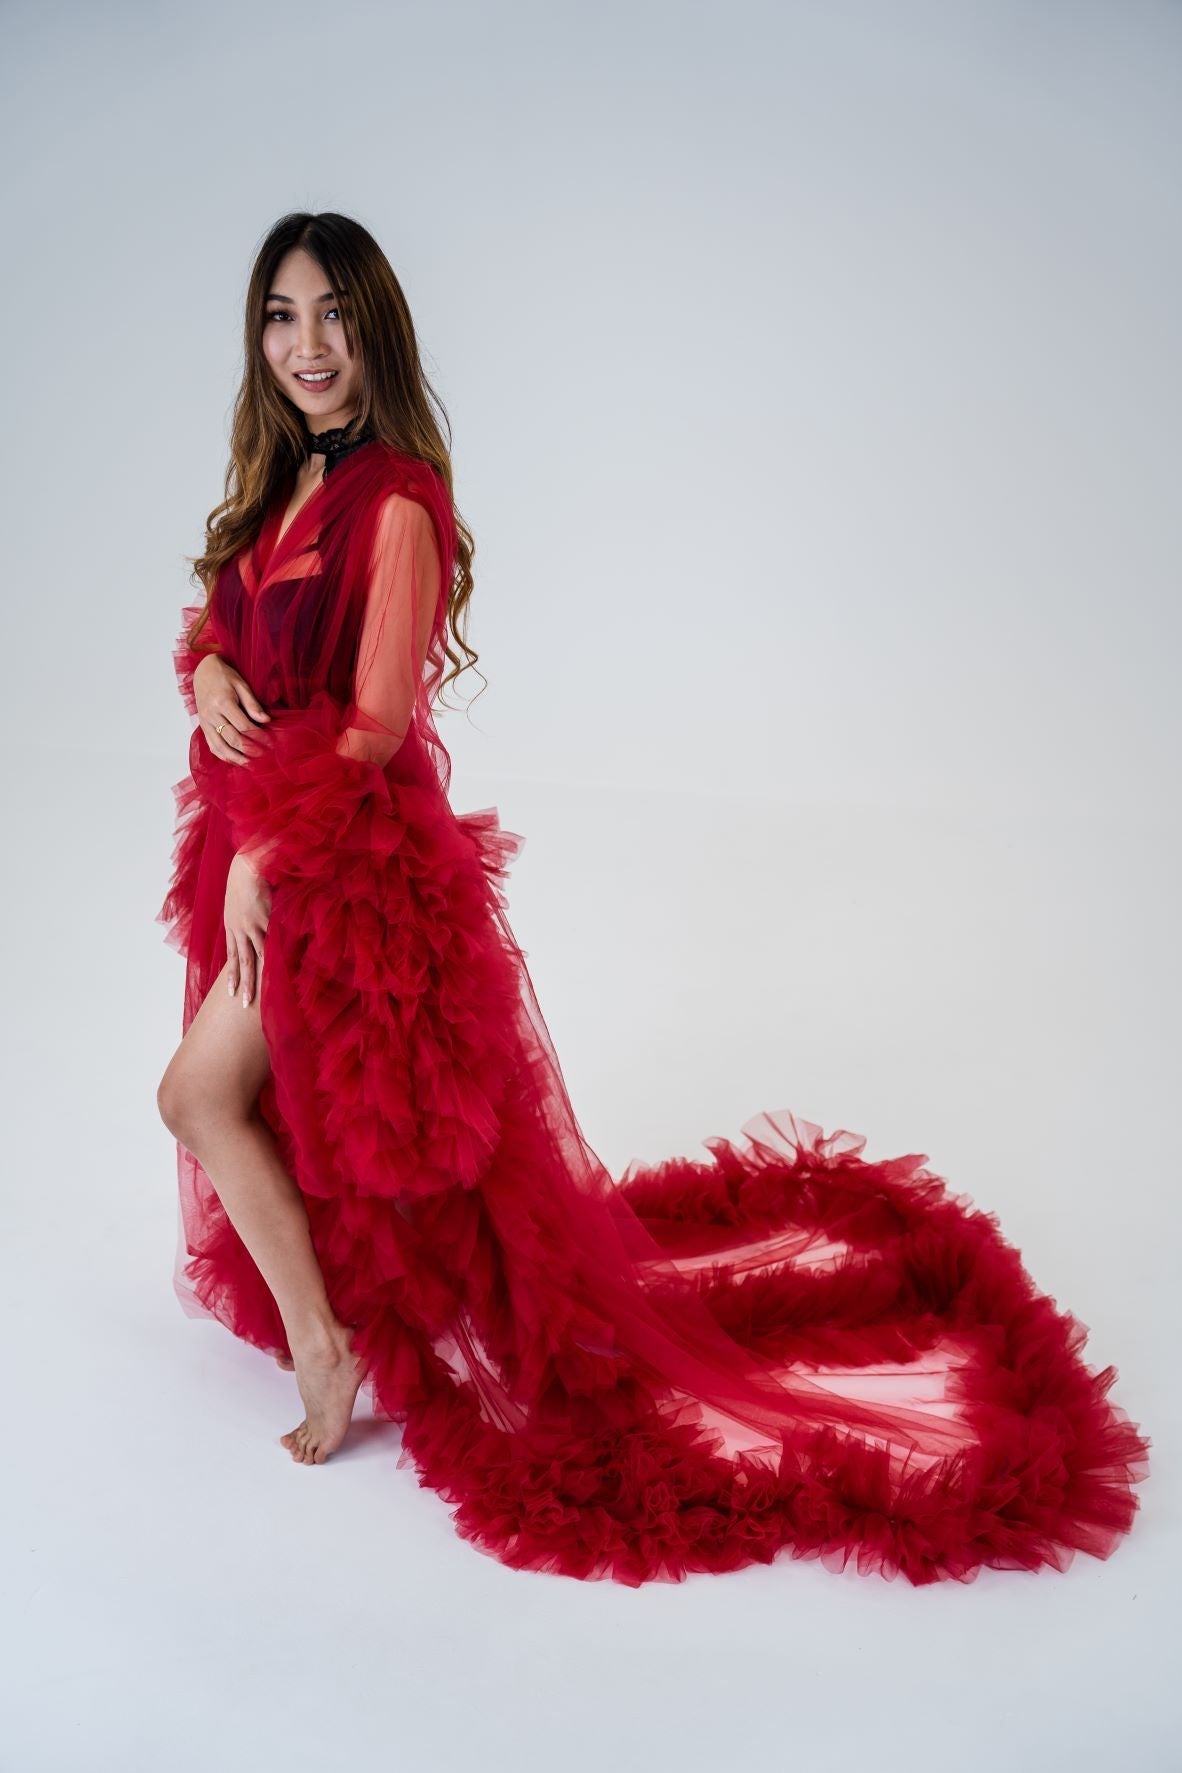 Dress Hire - Maternity Photoshoot Dresses - Sophie - Wine Red Tulle Robe - 4 DAY RENTAL - Luxe Bumps AU